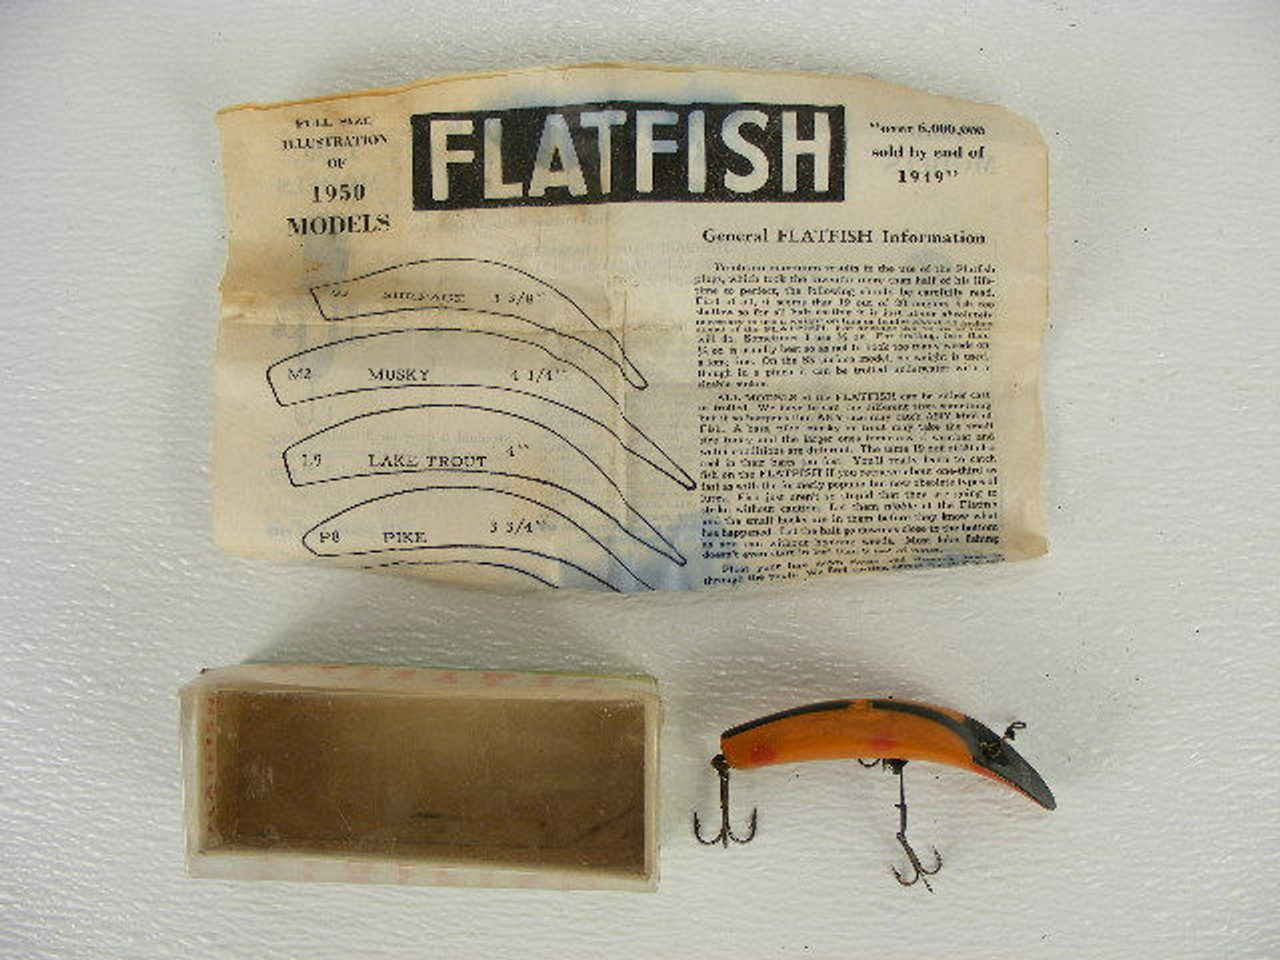 A vintage Flatfish lure in the original box from 1950. - Antique